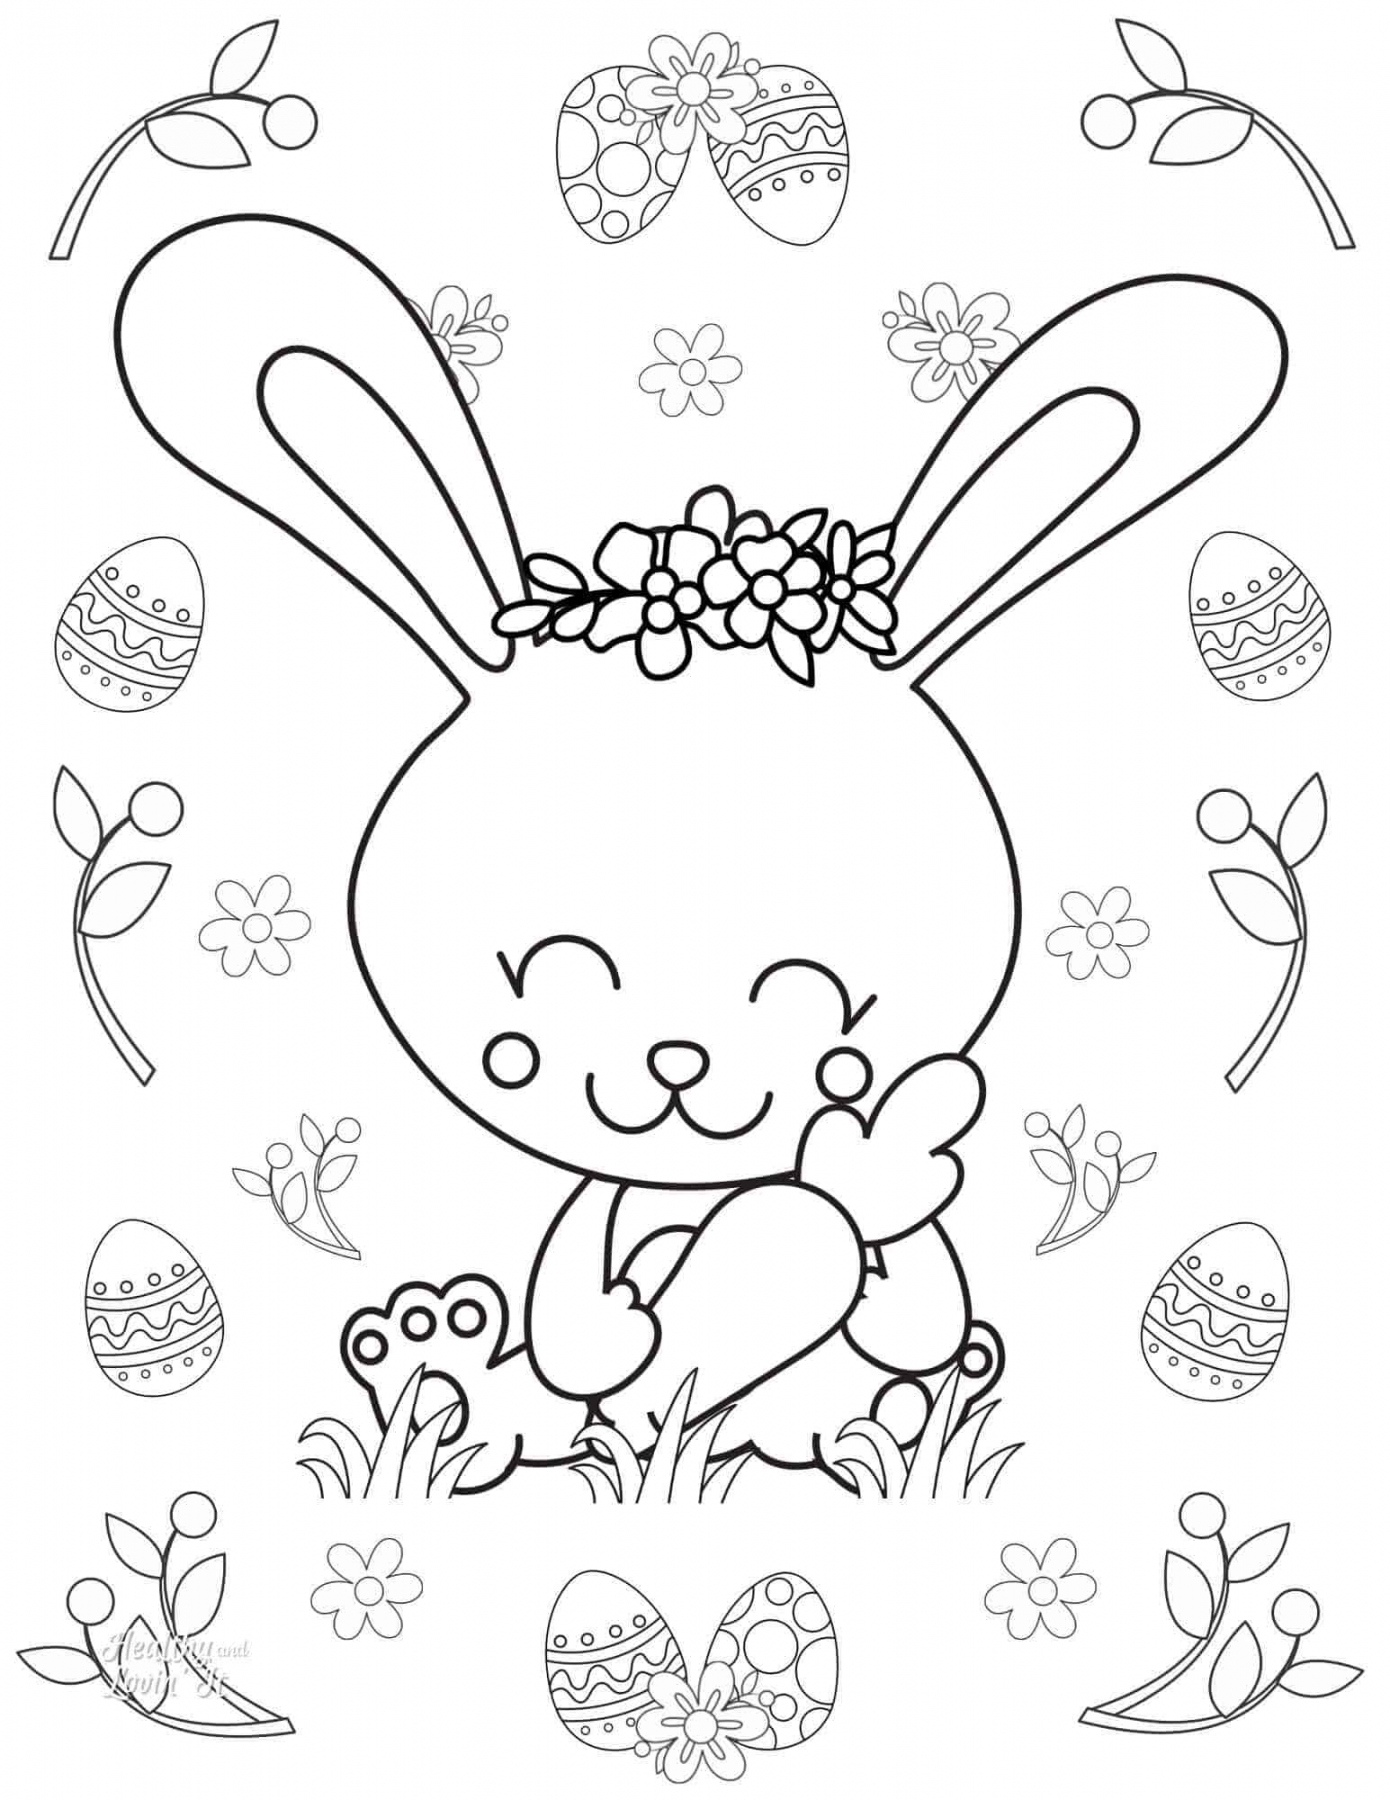 Easter Coloring Pages Free Printable - Printable - Cute Easter Coloring Pages - Free Printables!